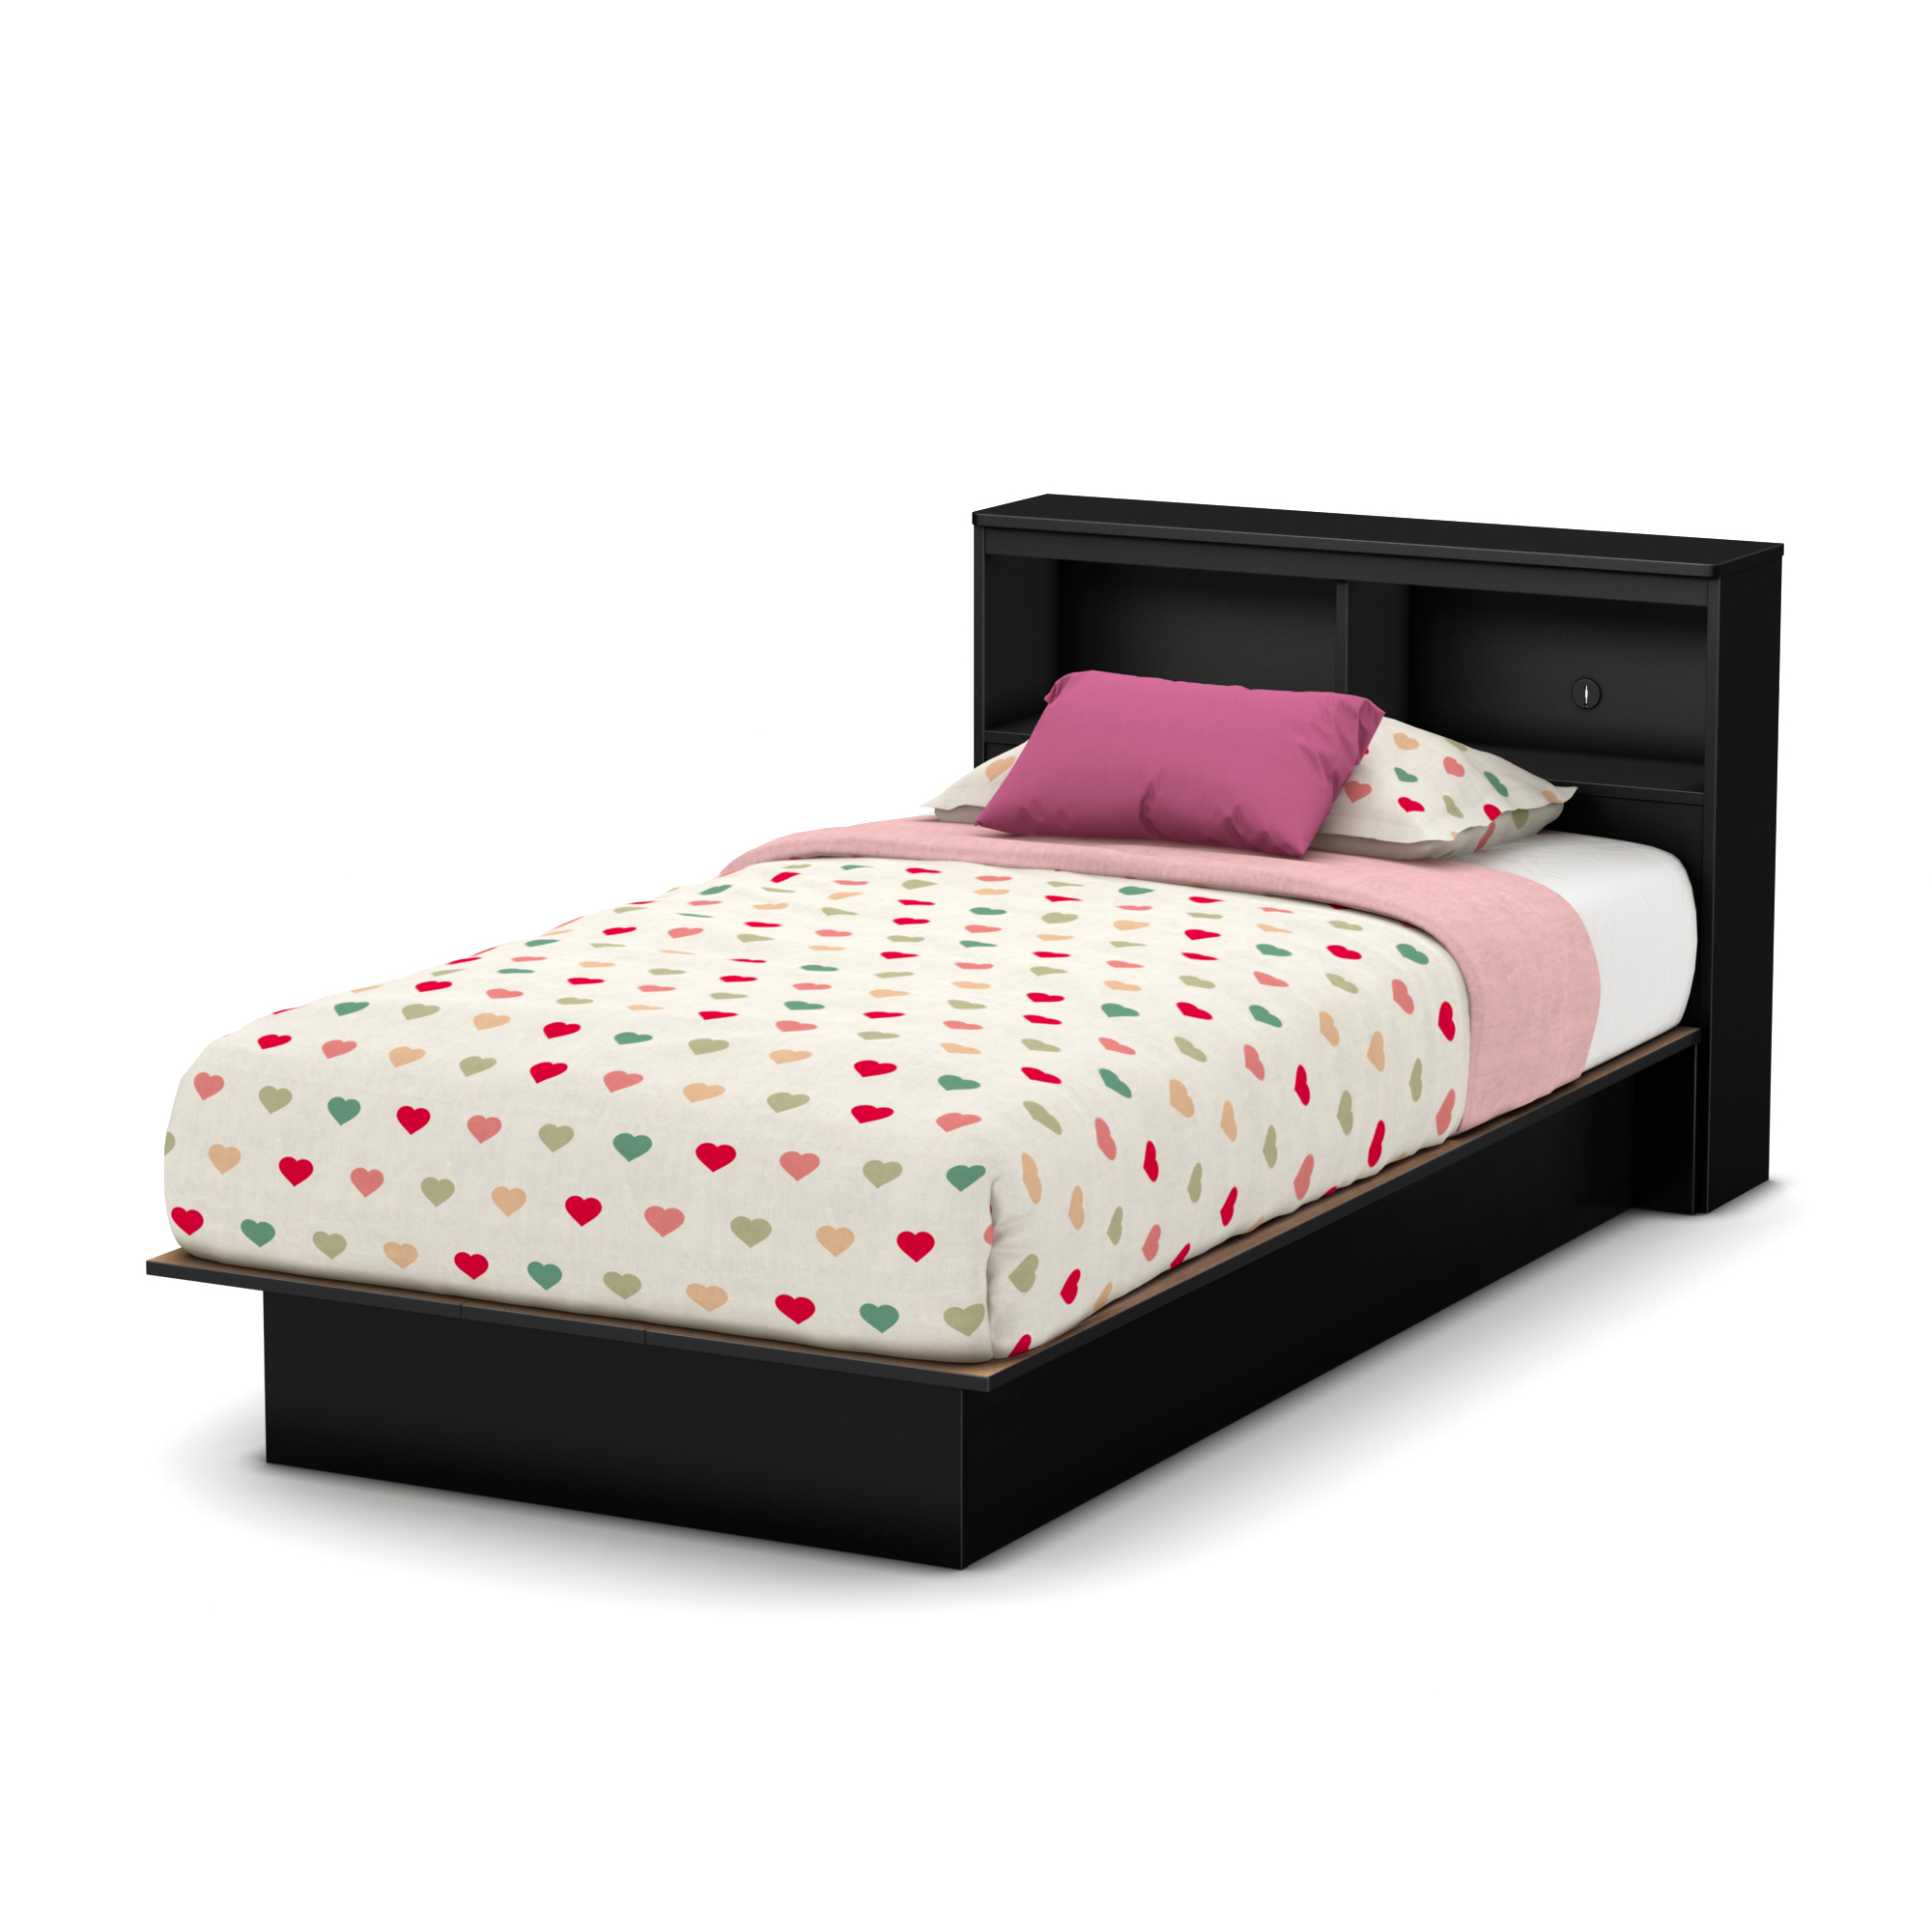 South Shore Libra Kid's Twin Platform Bed in Pure Black Finish - image 5 of 10